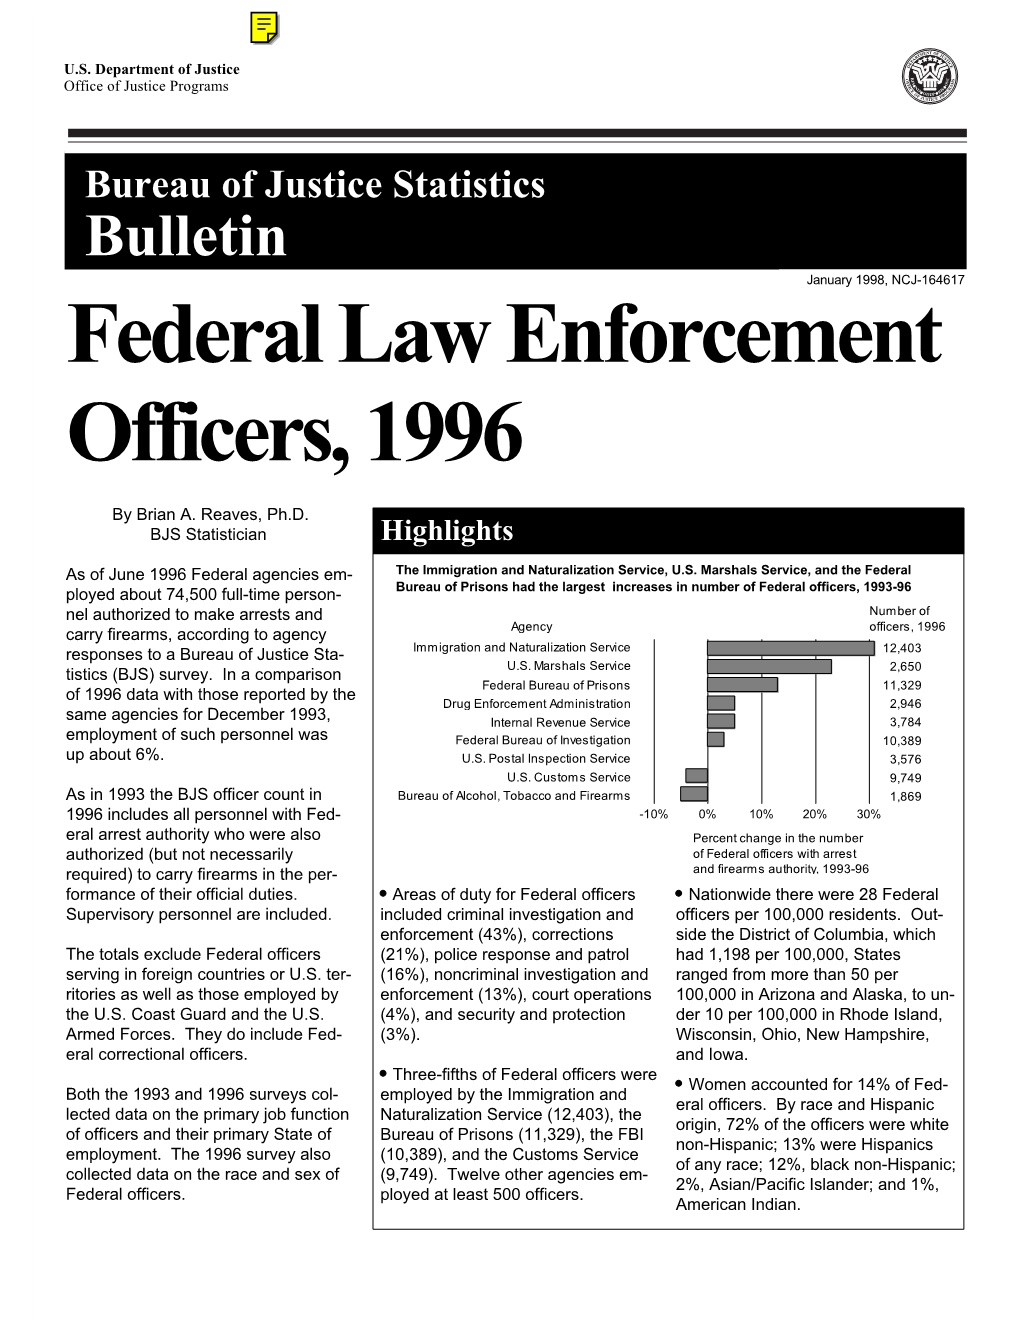 Federal Law Enforcement Officers 1996